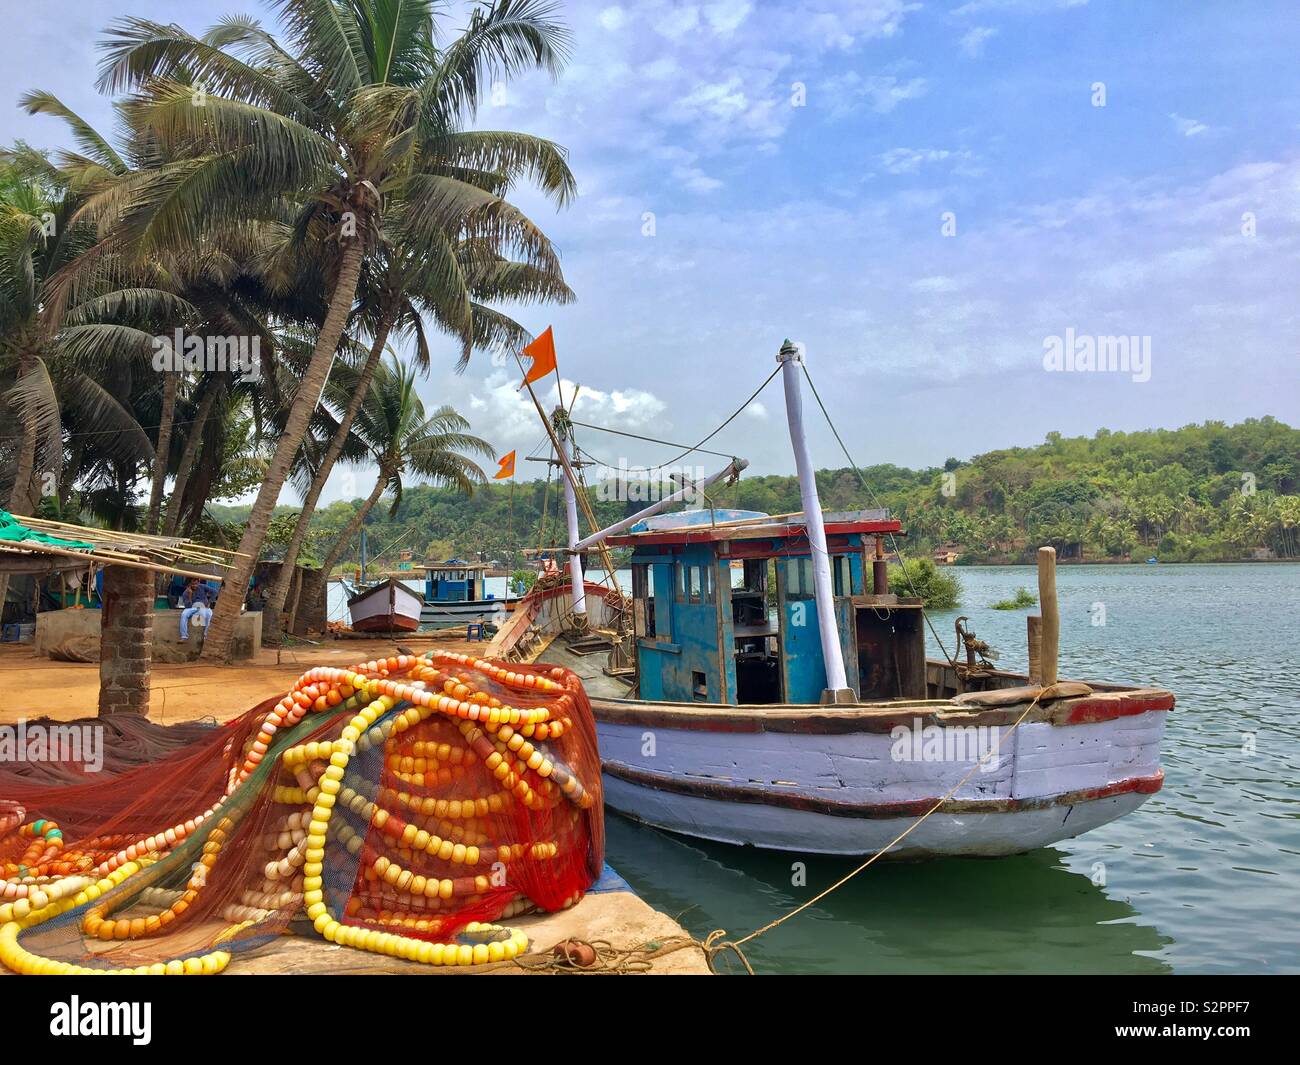 A small fishing boat in south India Stock Photo